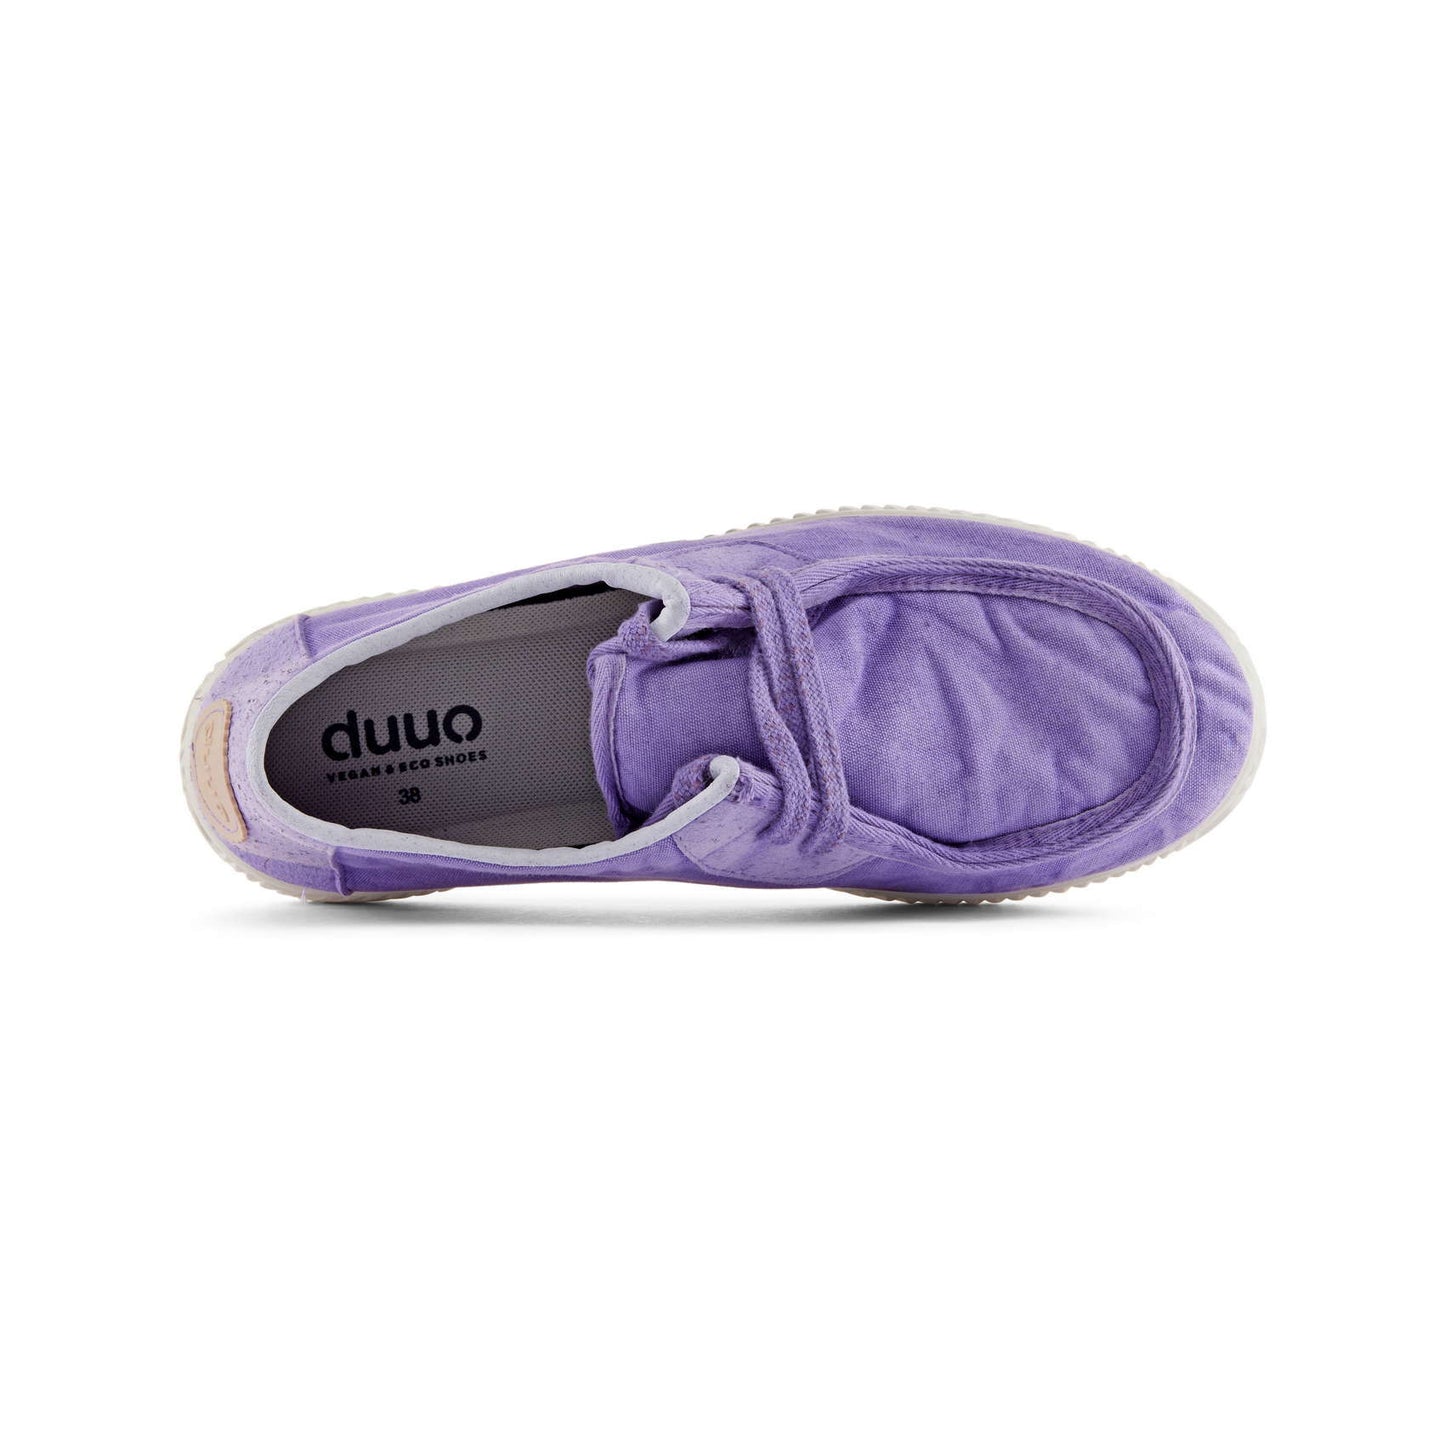 DUUO | 女性运动鞋 | ONA WALABY WASHED 050 VIOLET 78) |